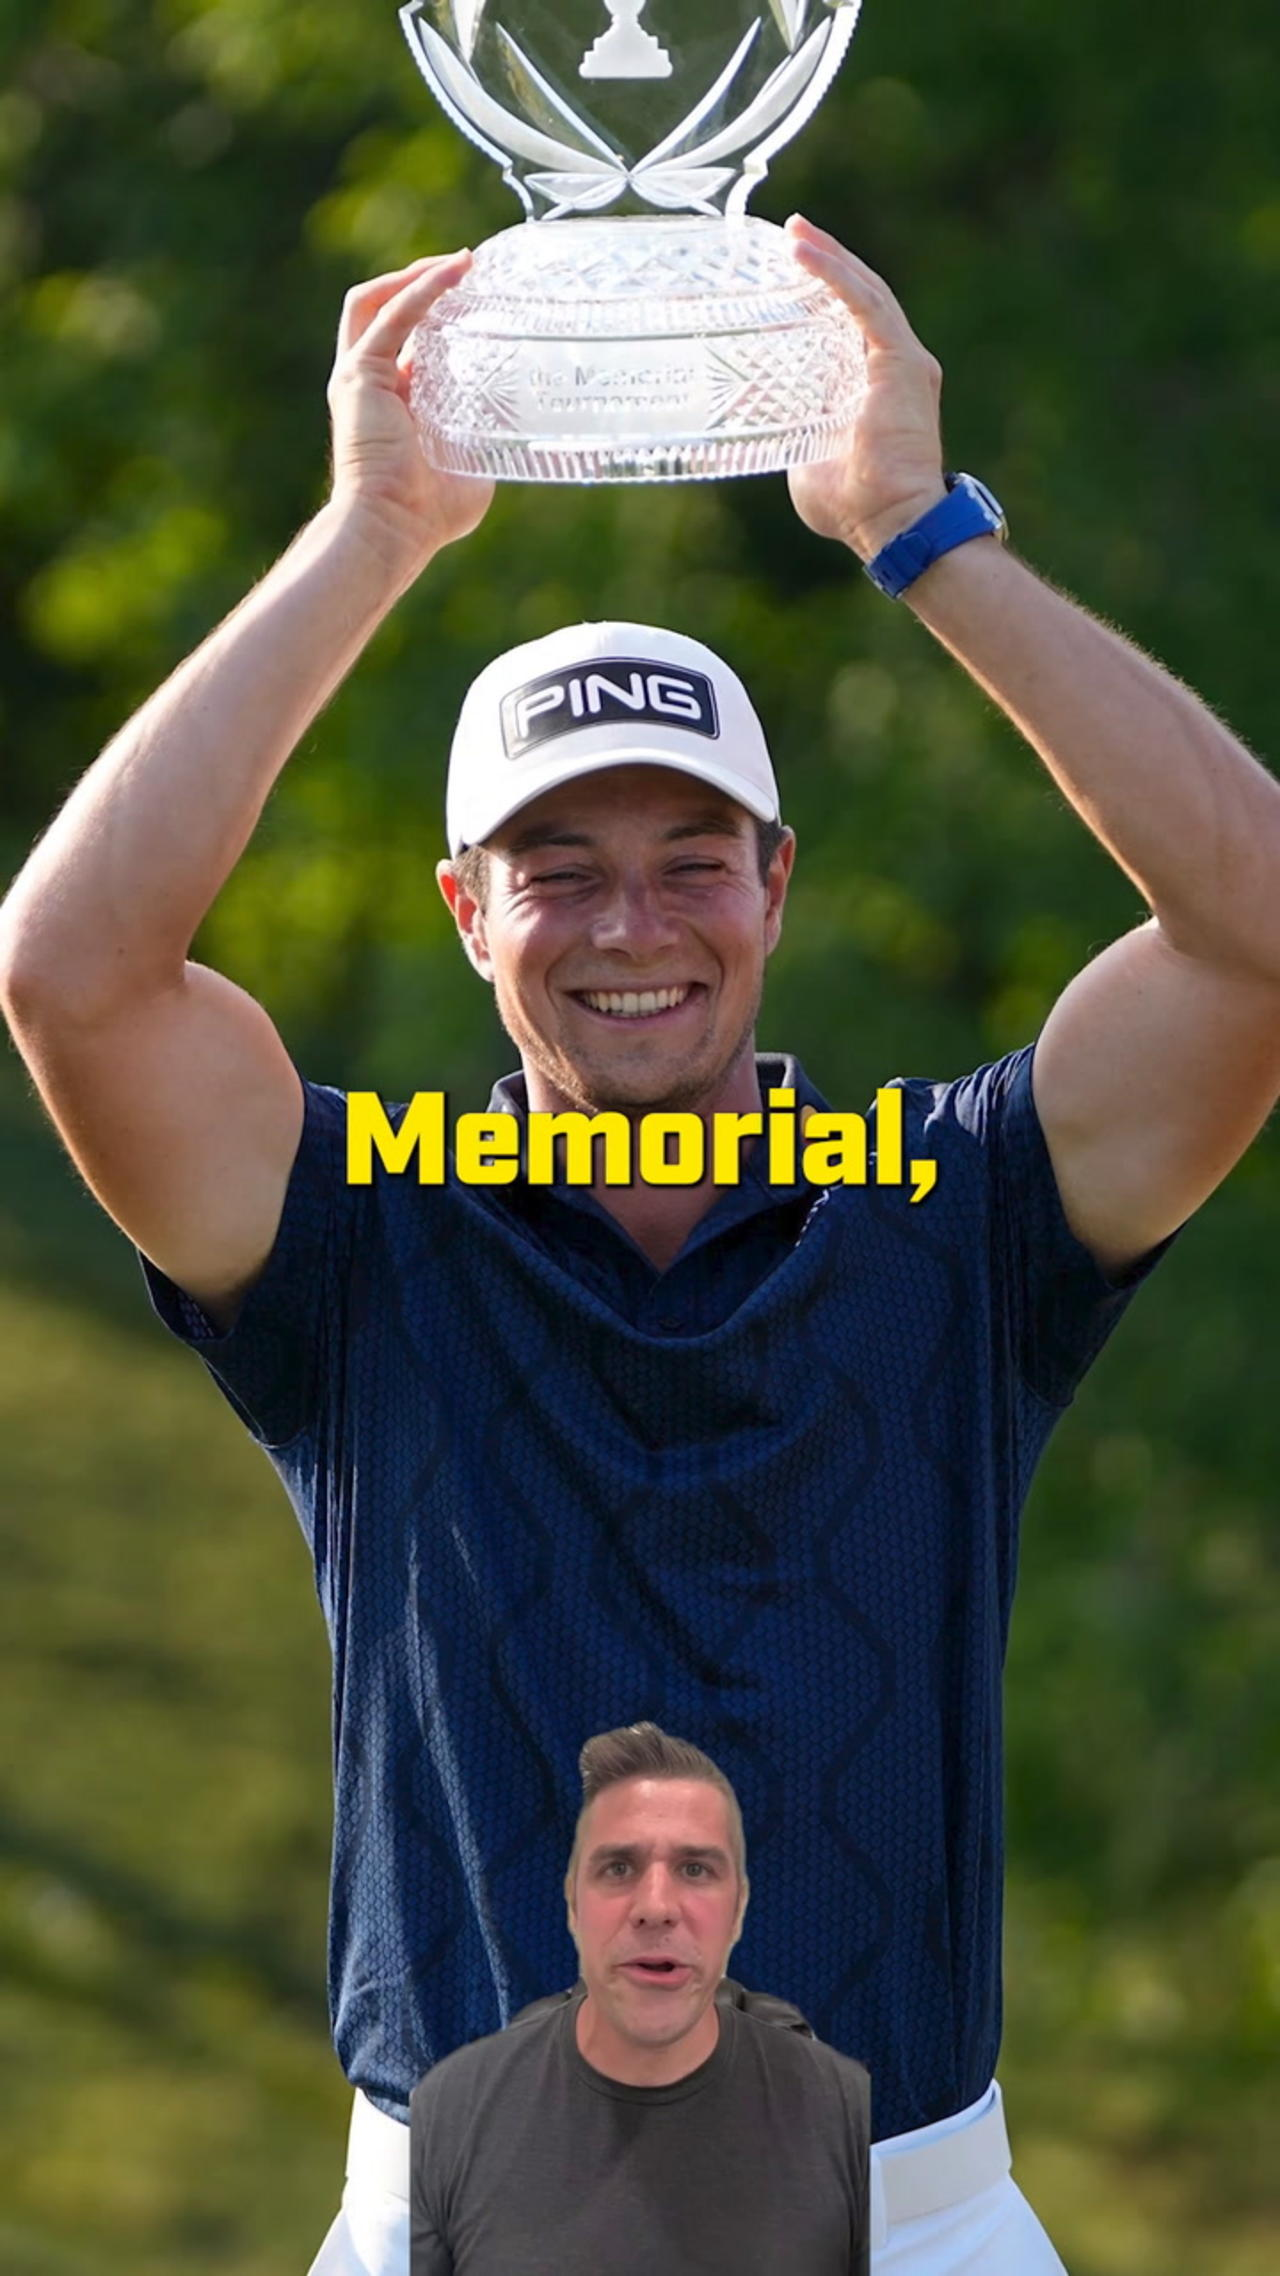 Viktor Hovland Turns Caddy Less than 24 Hours After Winning $3.6 Million at The Memorial